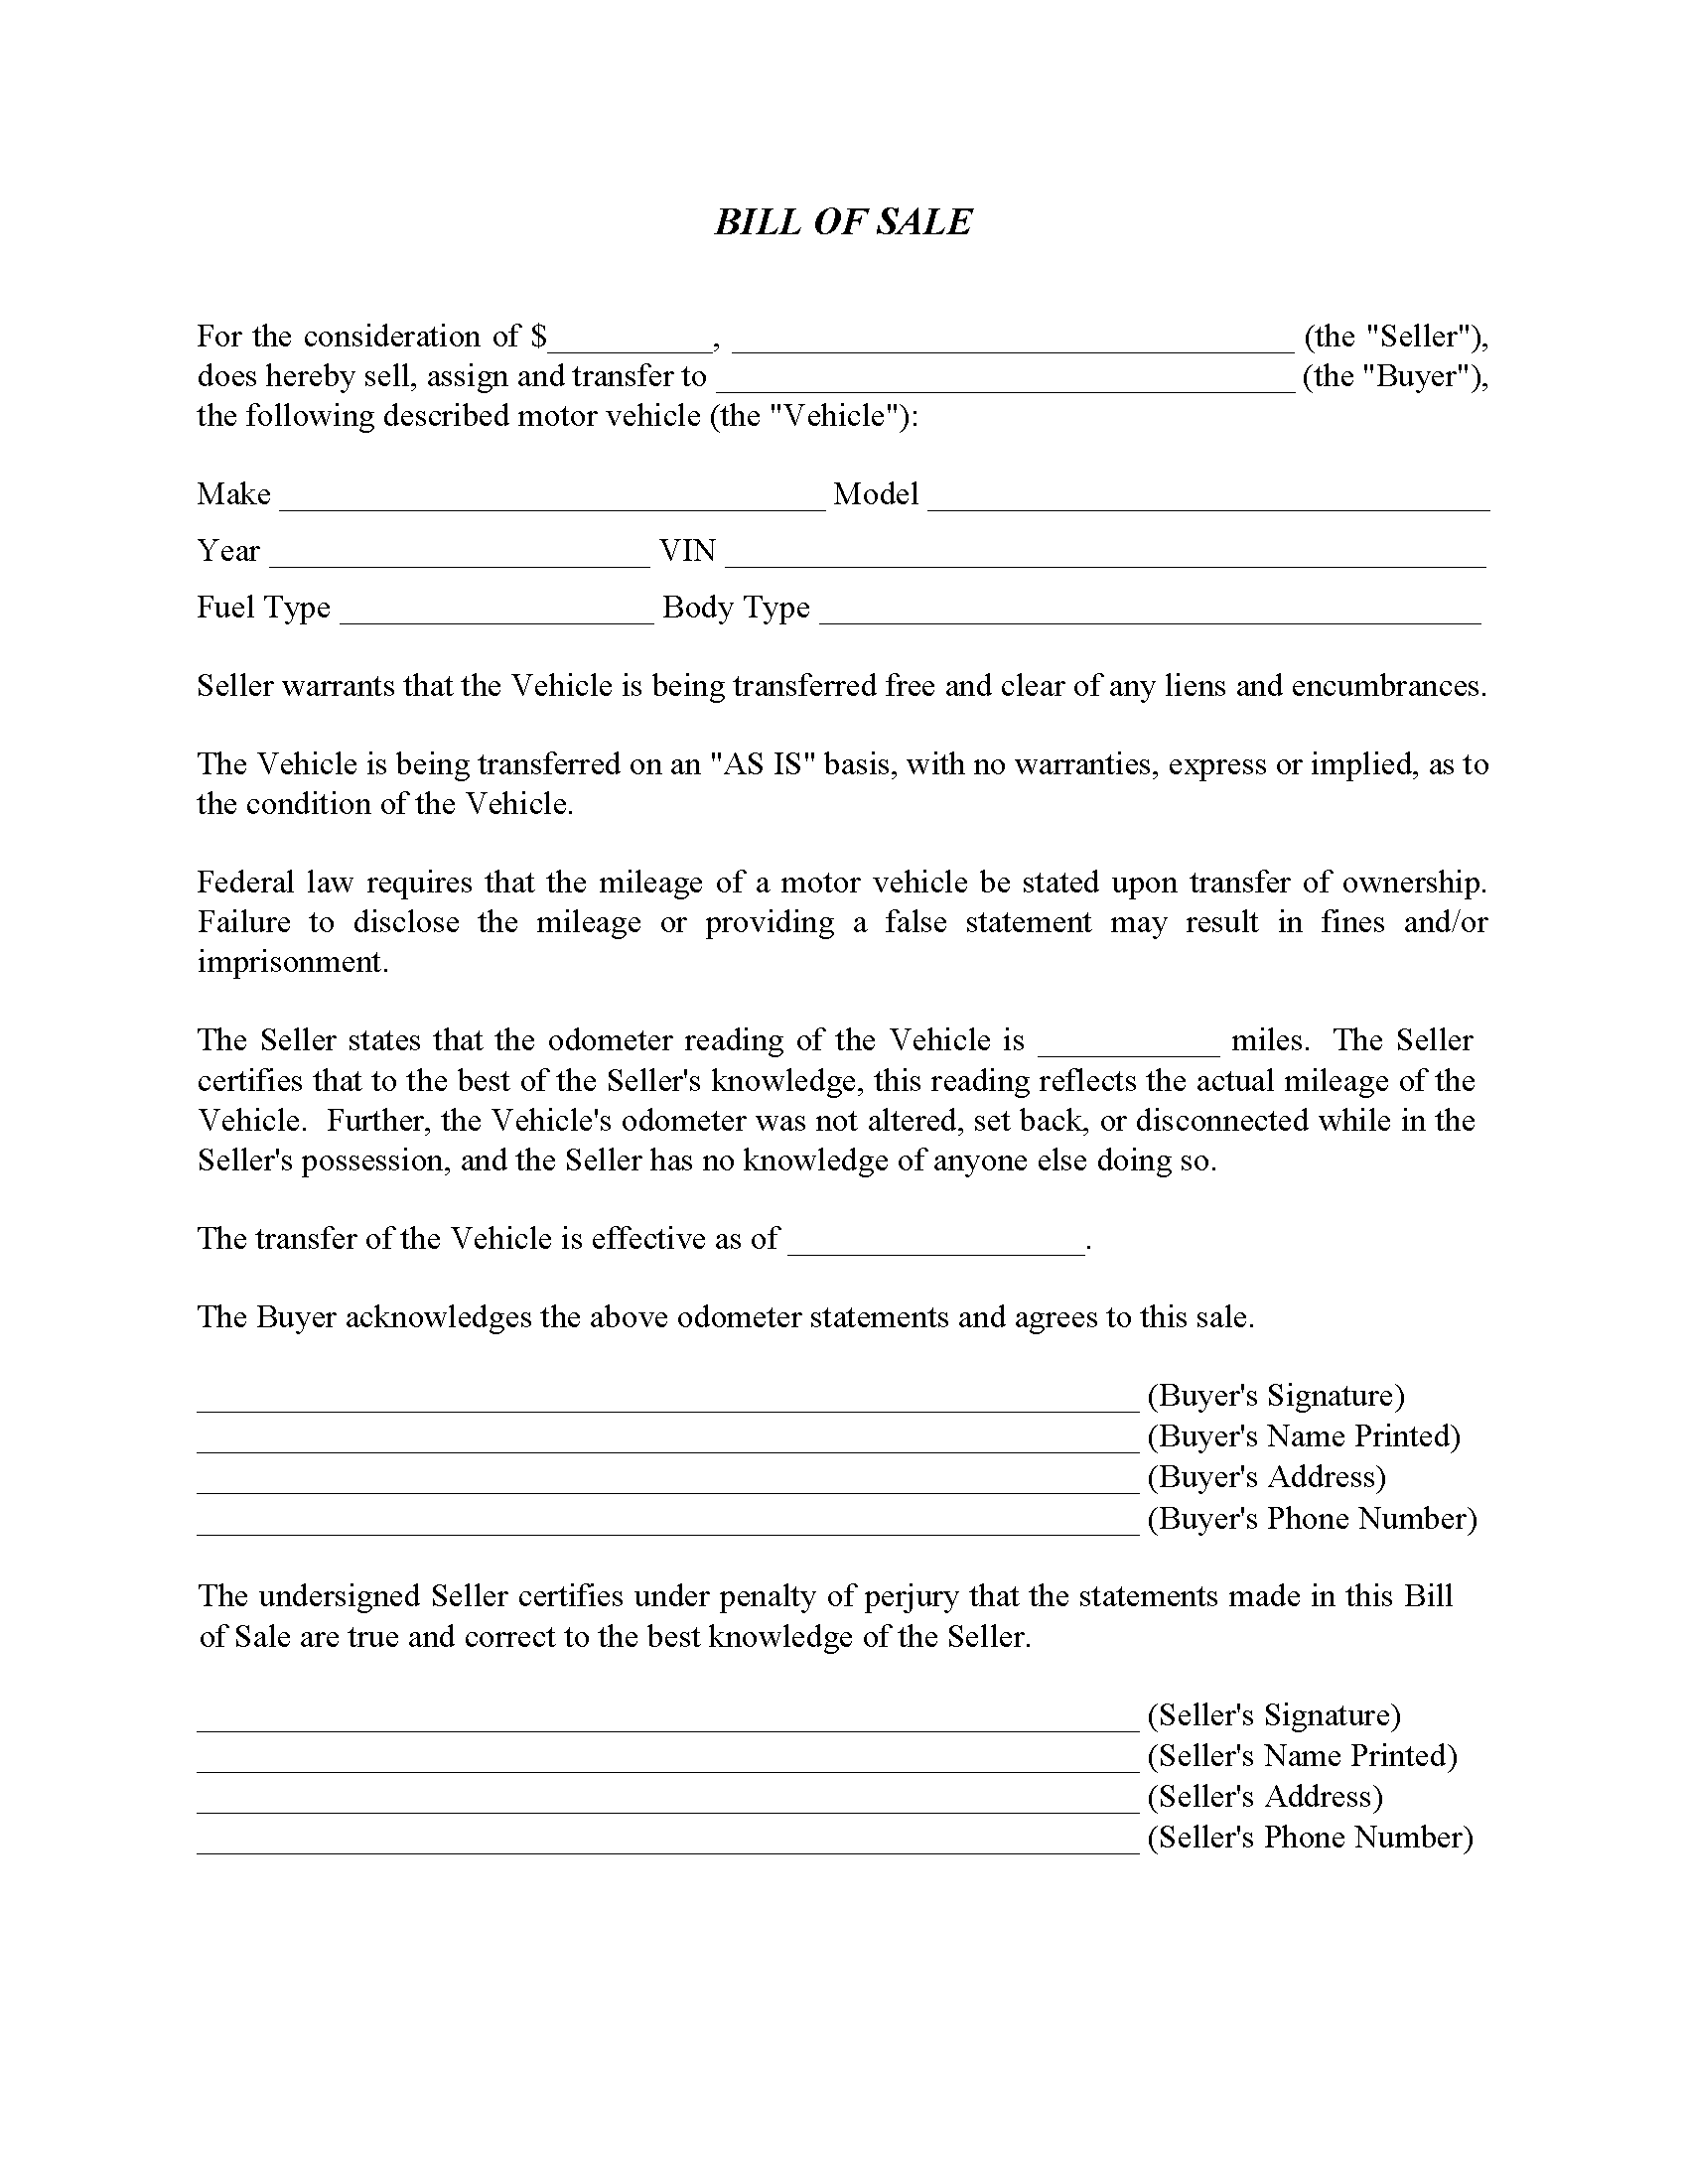 arkansas-motor-vehicle-bill-of-sale-form-free-printable-legal-forms